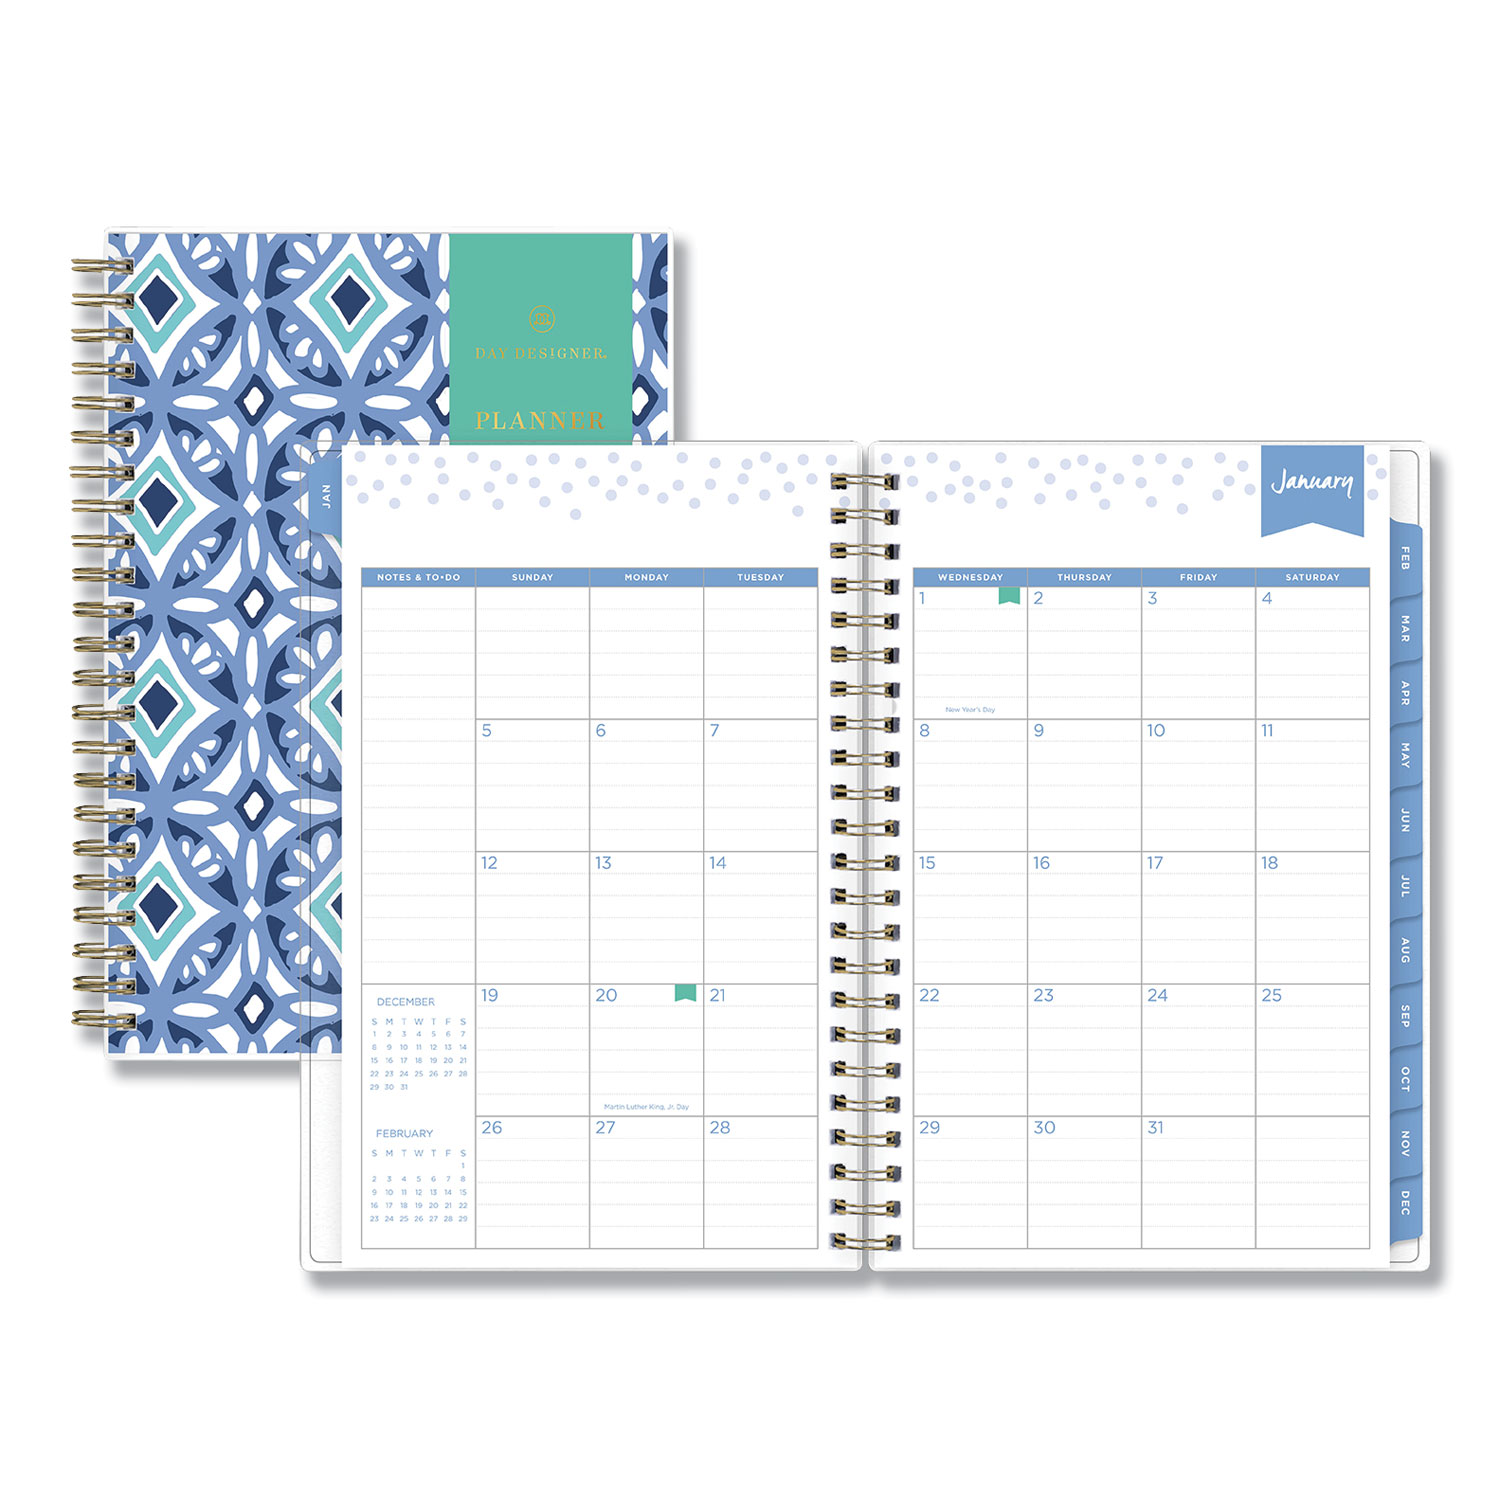  Blue Sky 101410 Day Designer Tile Weekly/Monthly Planner, 8 x 5, Blue/White Cover, 2020 (BLS101410) 